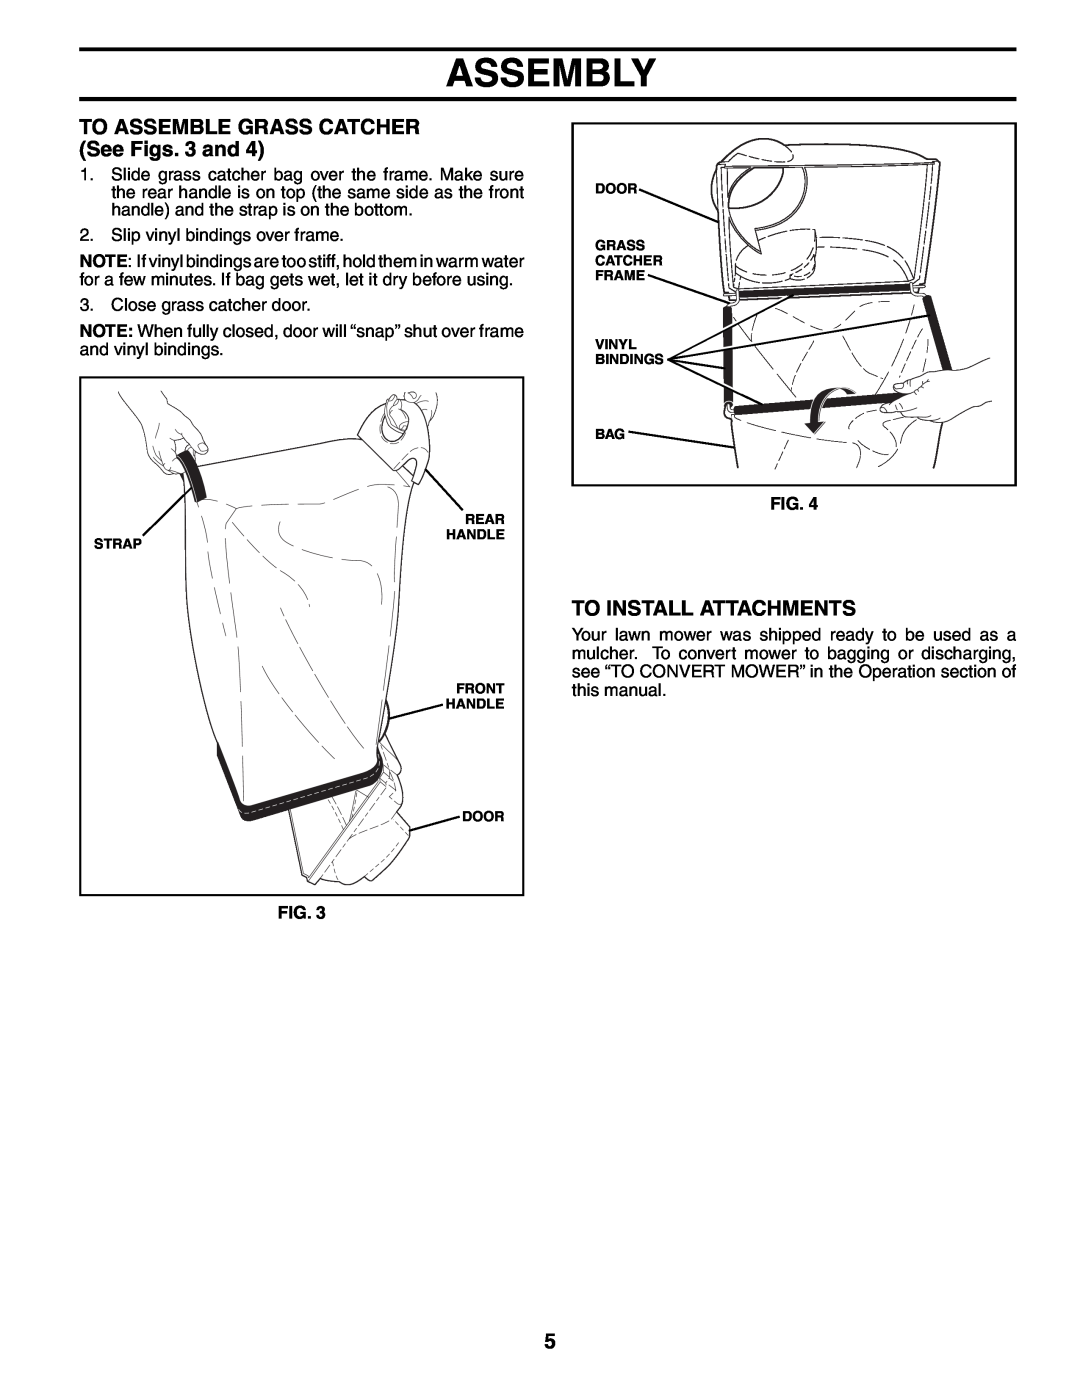 Husqvarna 67521 HV owner manual TO ASSEMBLE GRASS CATCHER See Figs. 3 and, To Install Attachments, Assembly 